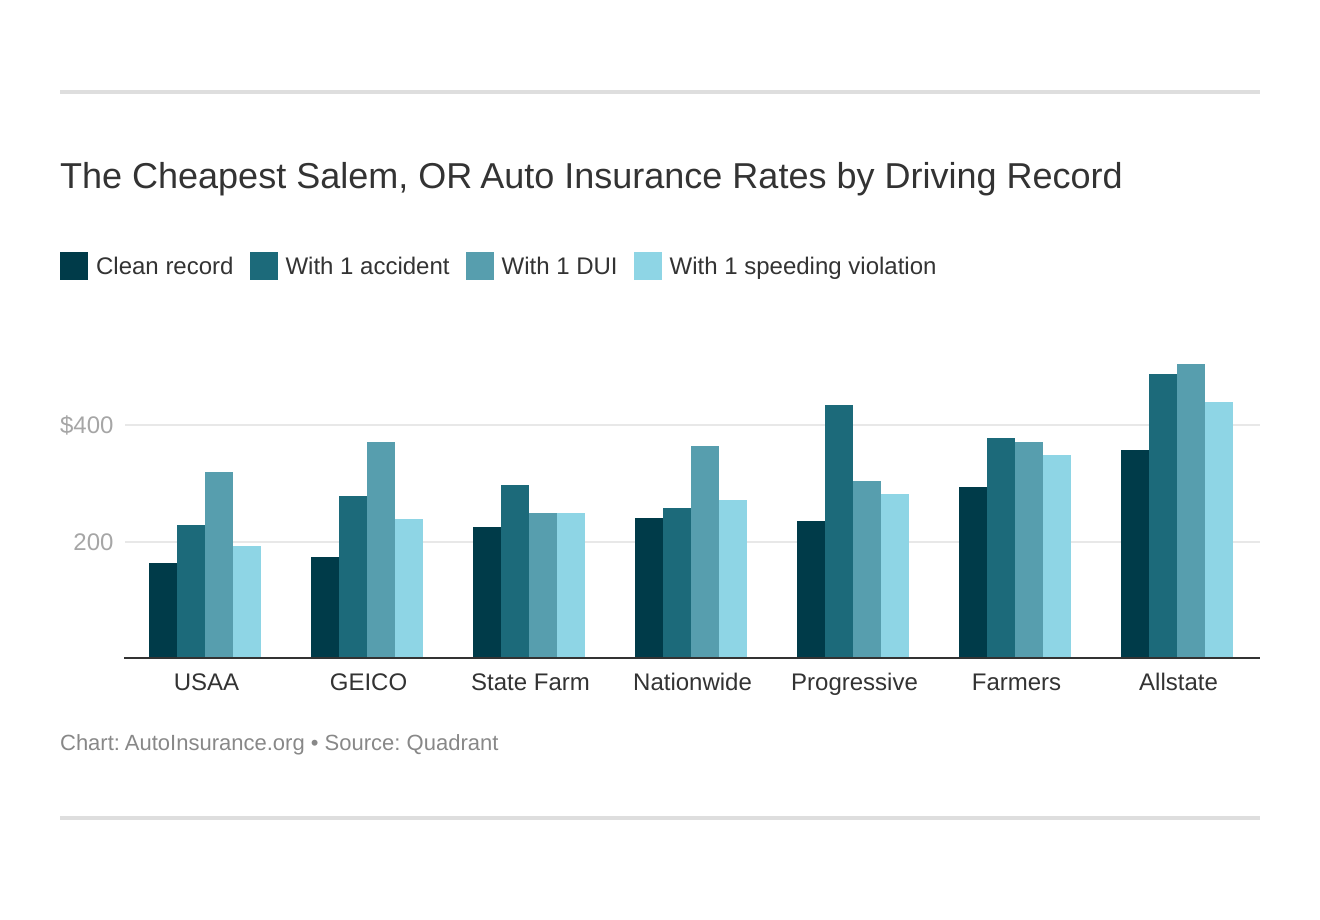 The Cheapest Salem, OR Auto Insurance Rates by Driving Record